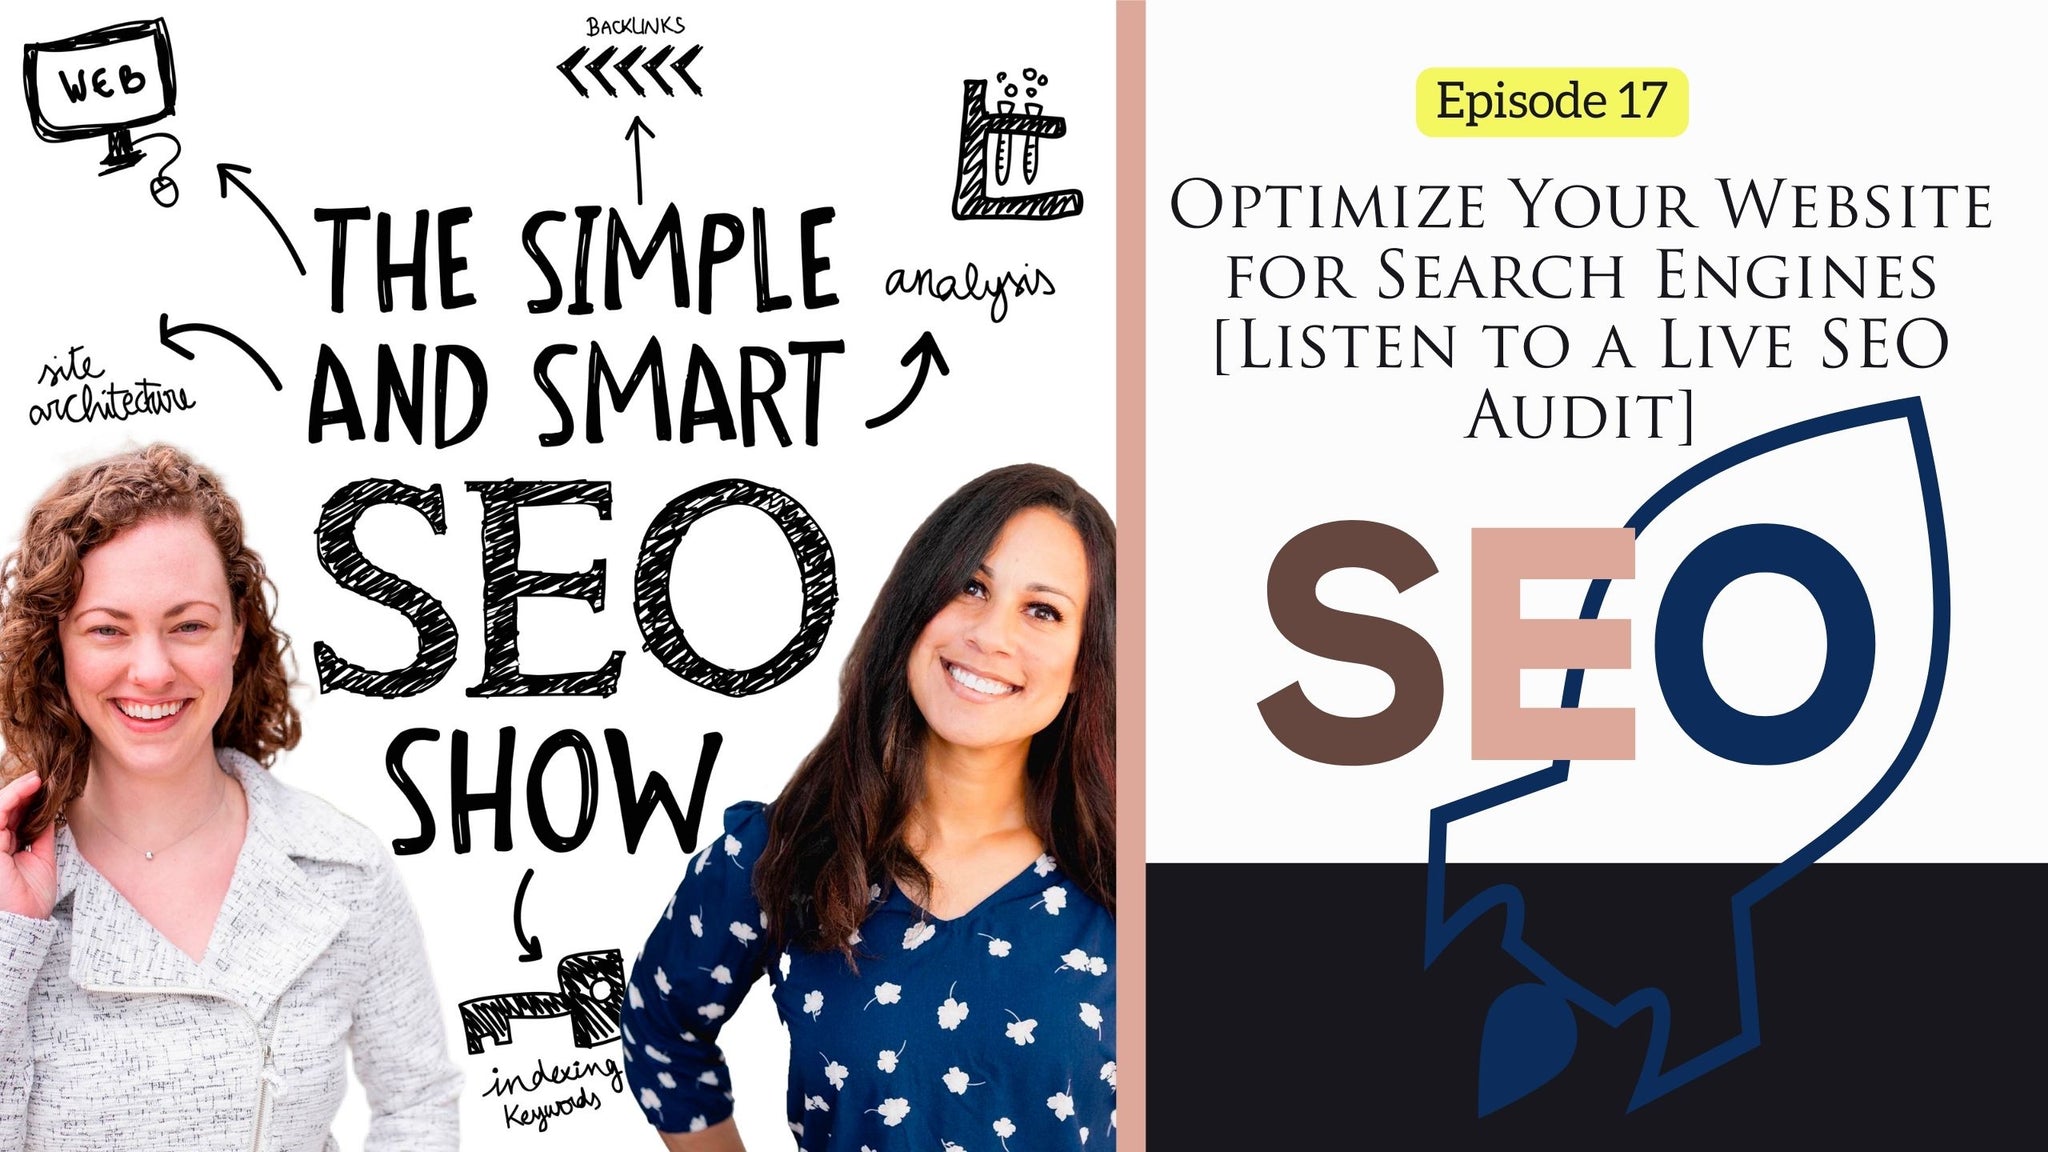 Live SEO Audit: Episode 17 of the SImple and Smart SEO Show